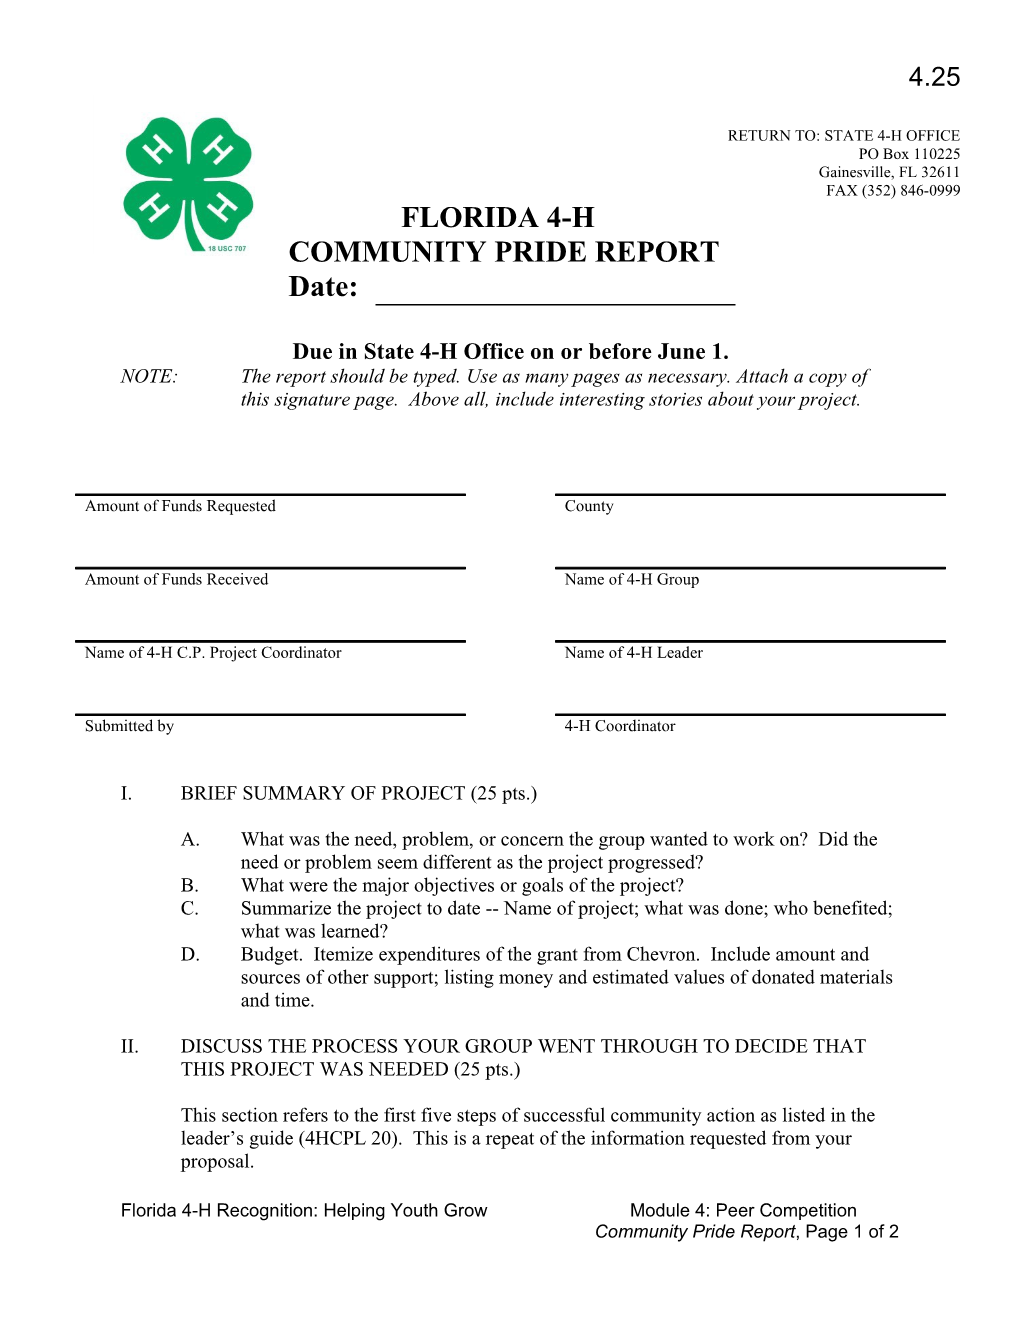 Due in State 4-H Office on Or Before June 1